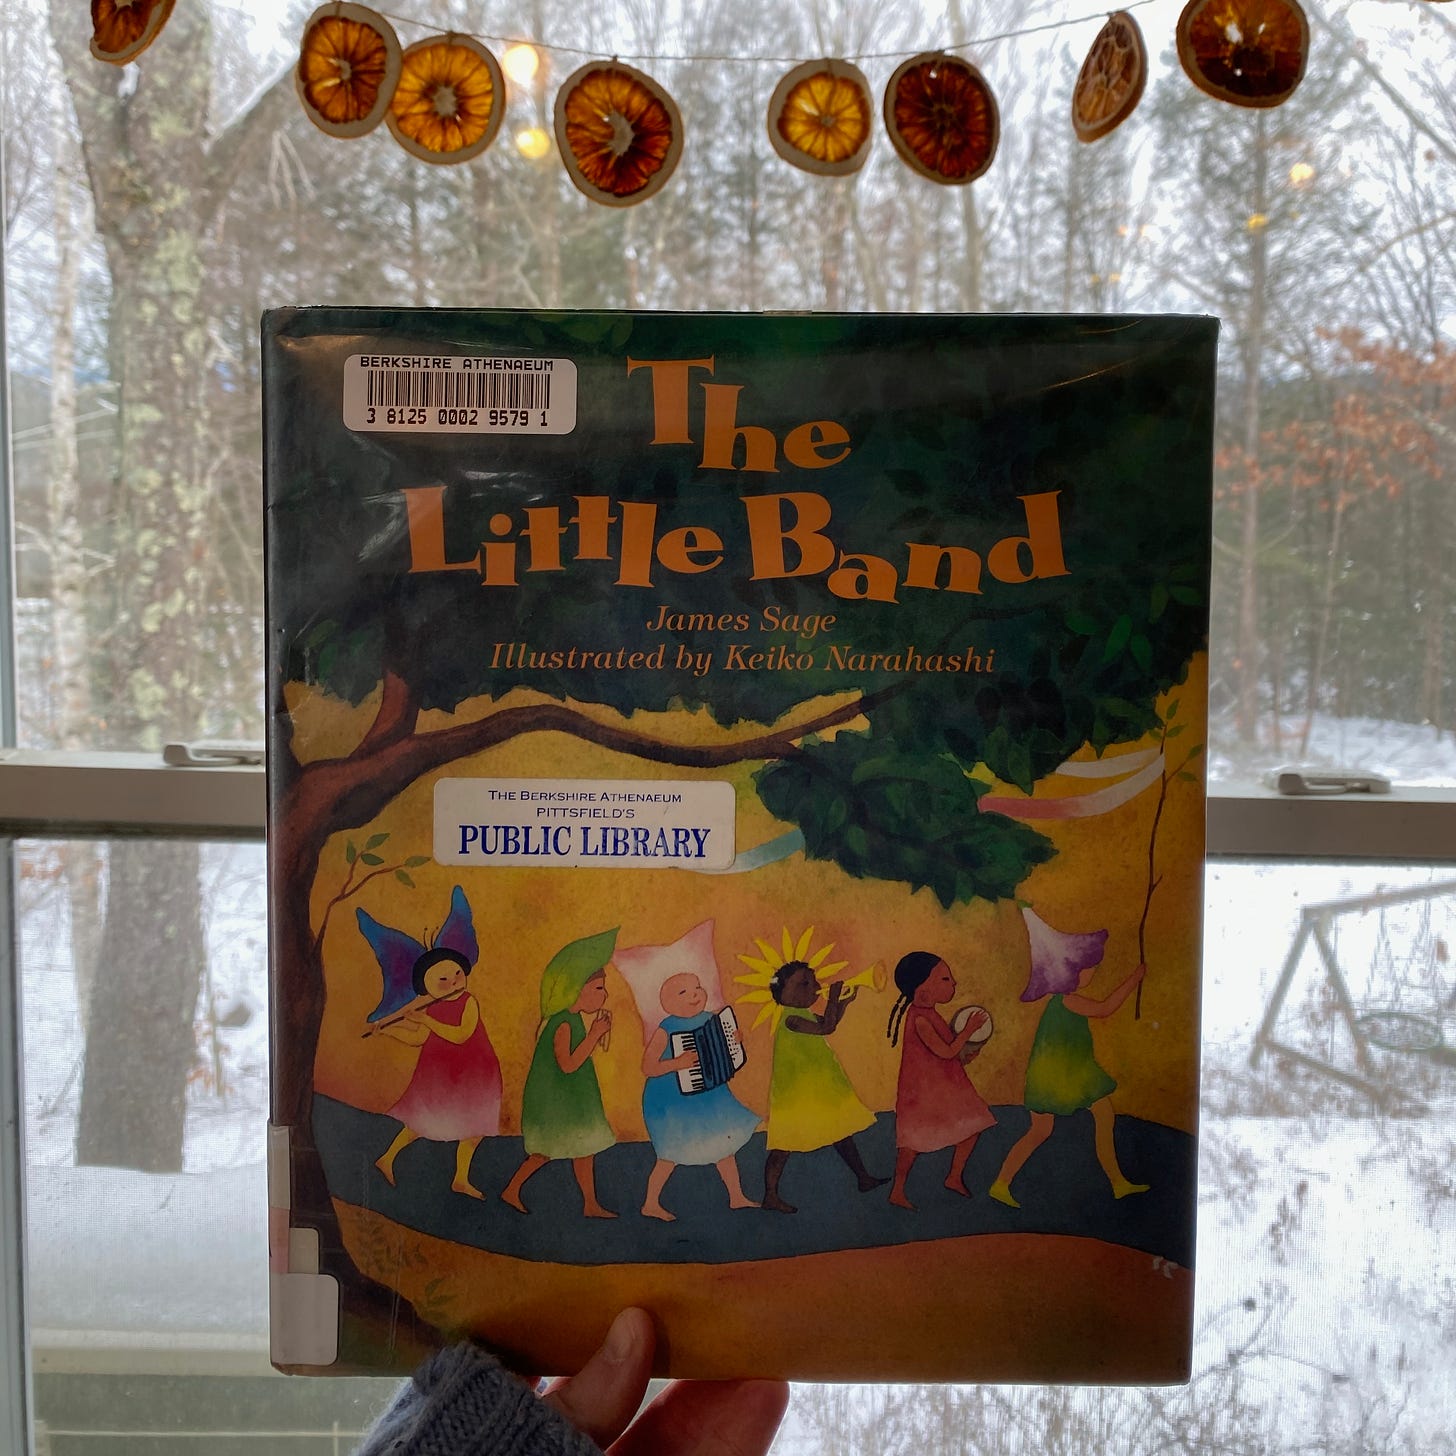 I’m holding The Little Band in front of a window underneath a garland of dried oranges.